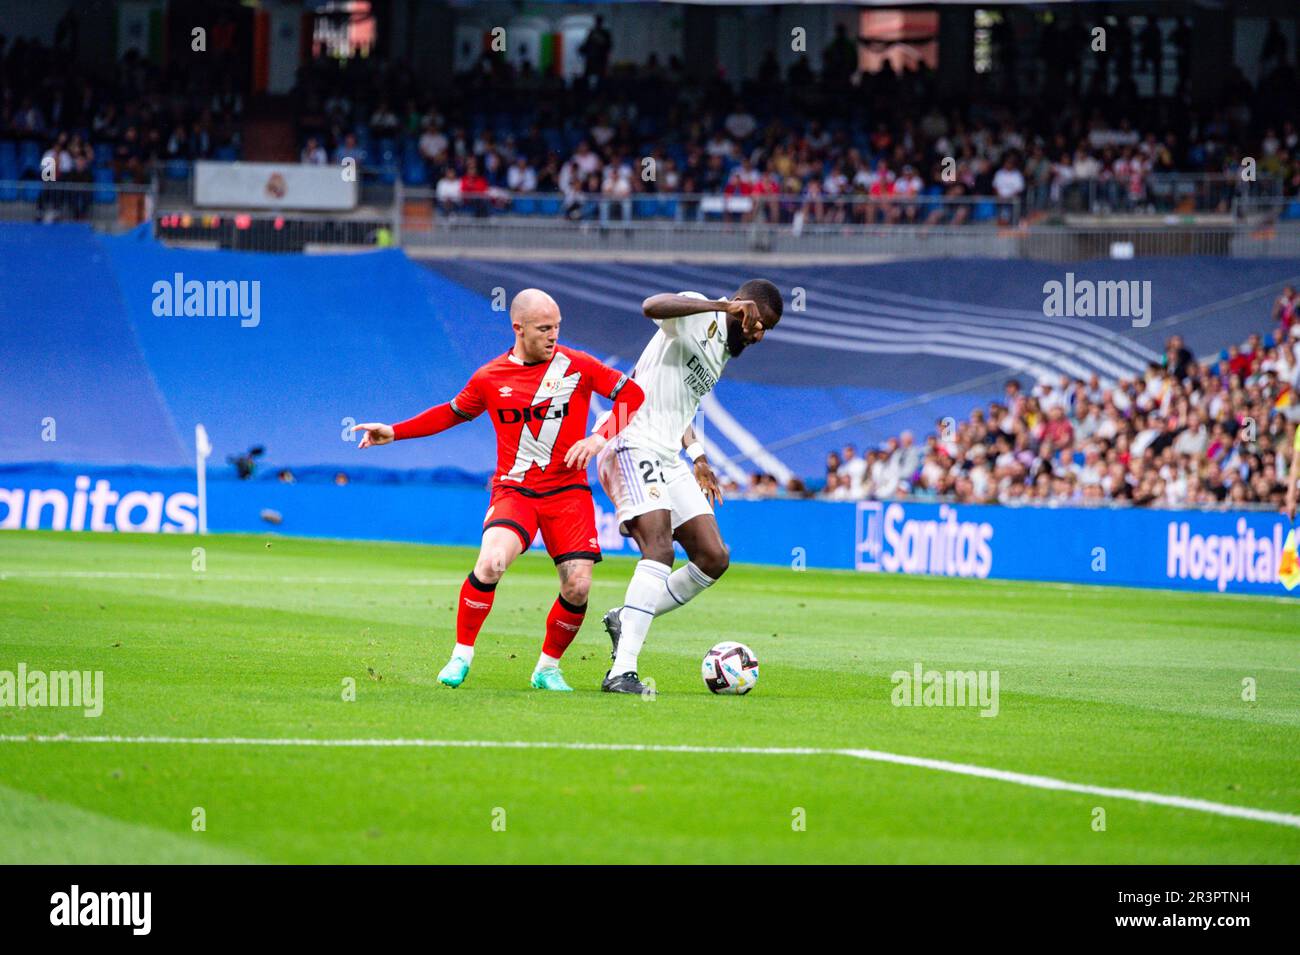 Madrid, Spain. 24th May, 2023. Antonio Rudiger (Real Madrid) against Isi Palazon (Rayo Vallecano) during the football match between&#xA;Real Madrid and Rayo Vallecano&#xA;valid for the match day 36 of the Spanish first division league “La Liga” celebrated in Madrid, Spain at Bernabeu stadium on Wednesday 24 May 2023 Credit: Live Media Publishing Group/Alamy Live News Stock Photo